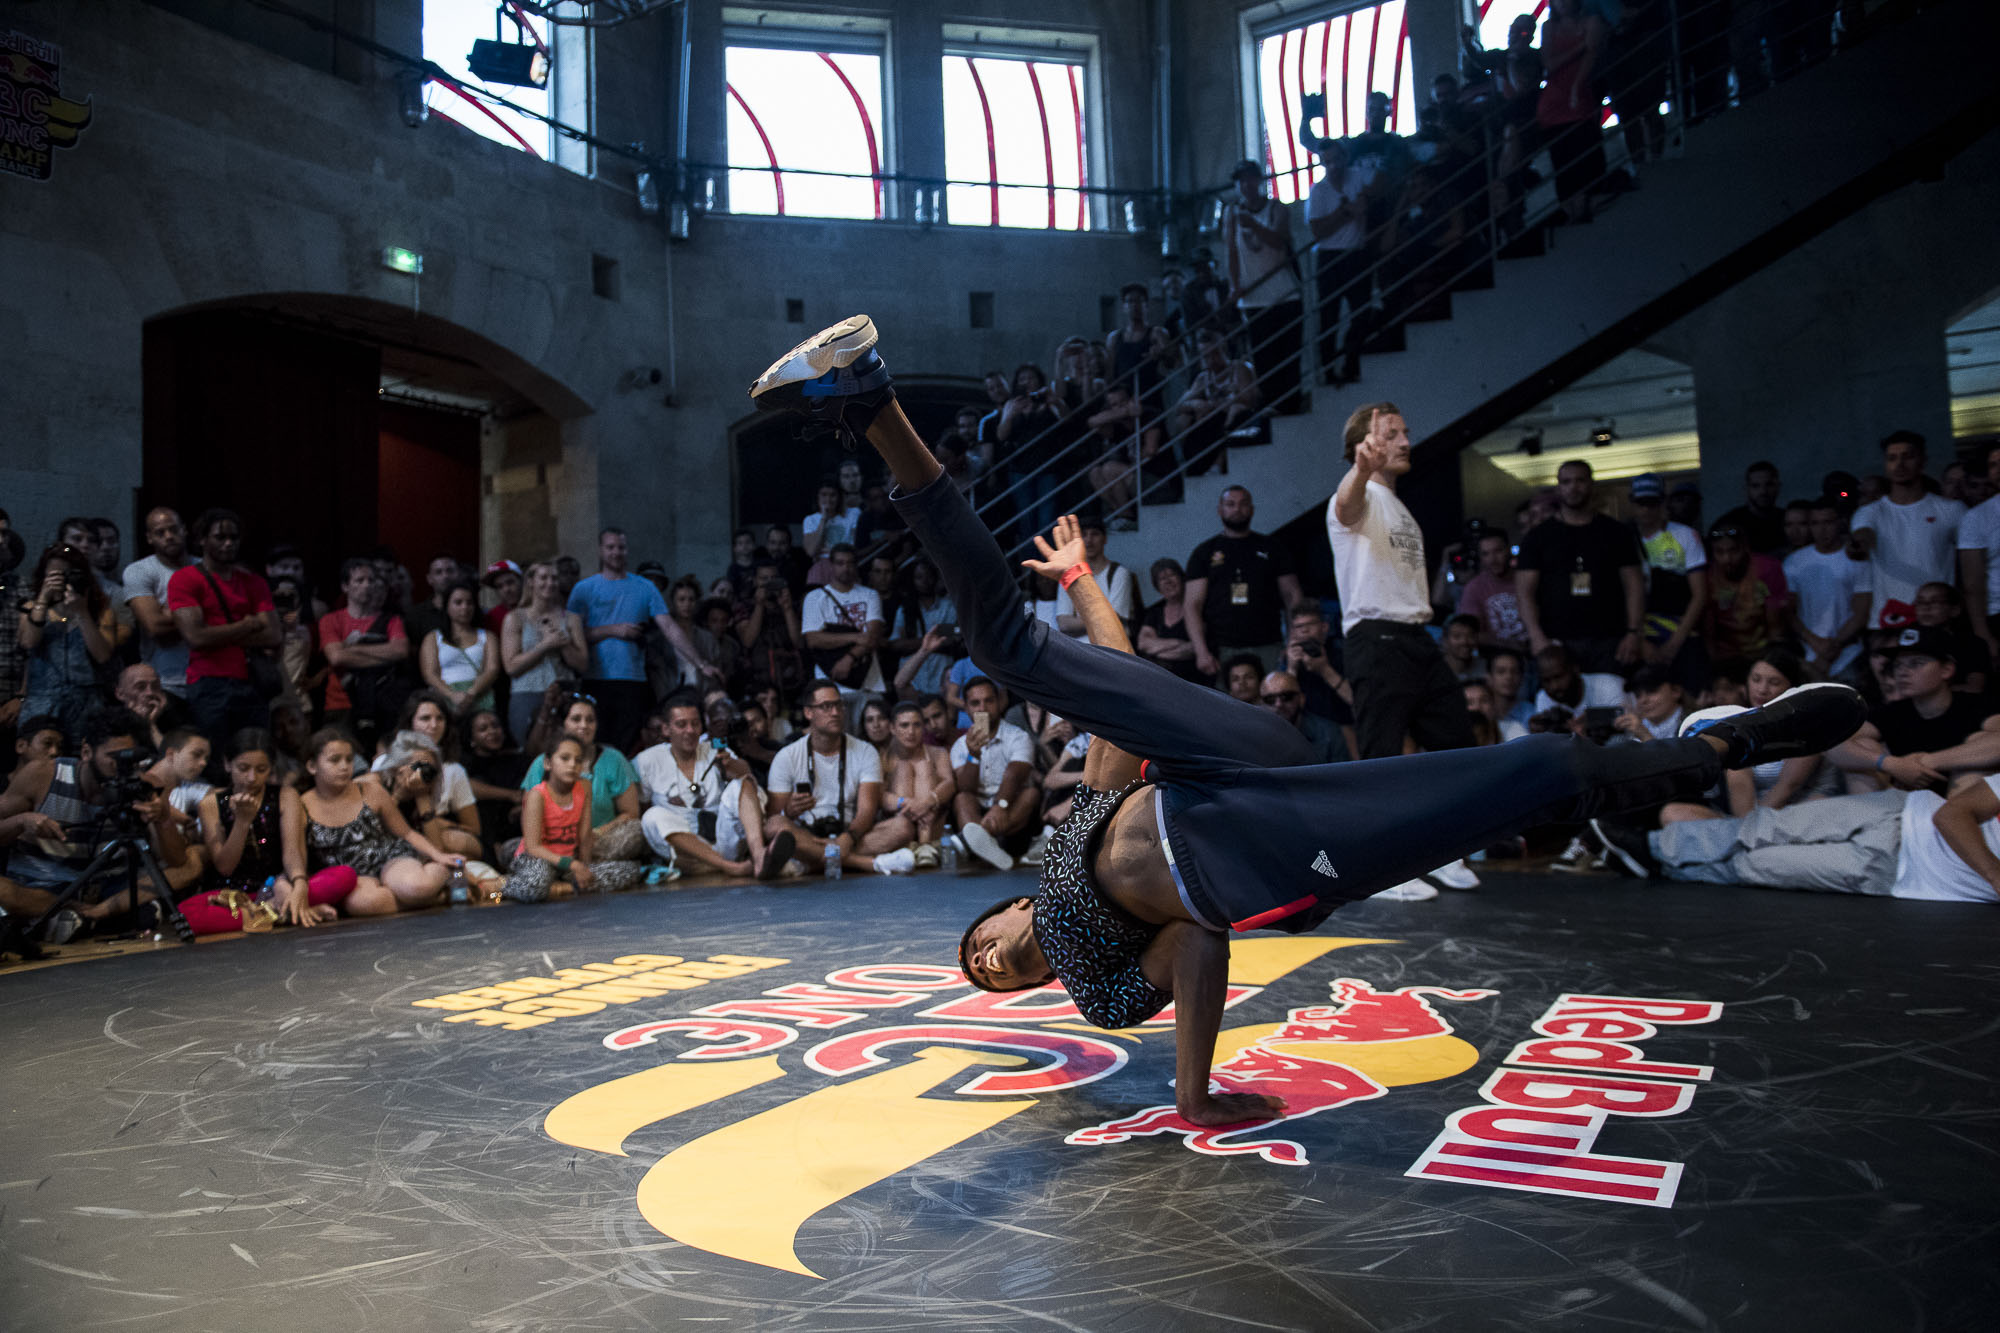 Niggaz competes at the WIP Villette during the Red Bull BC One France Cypher Final in Paris, France on July 10th 2016.